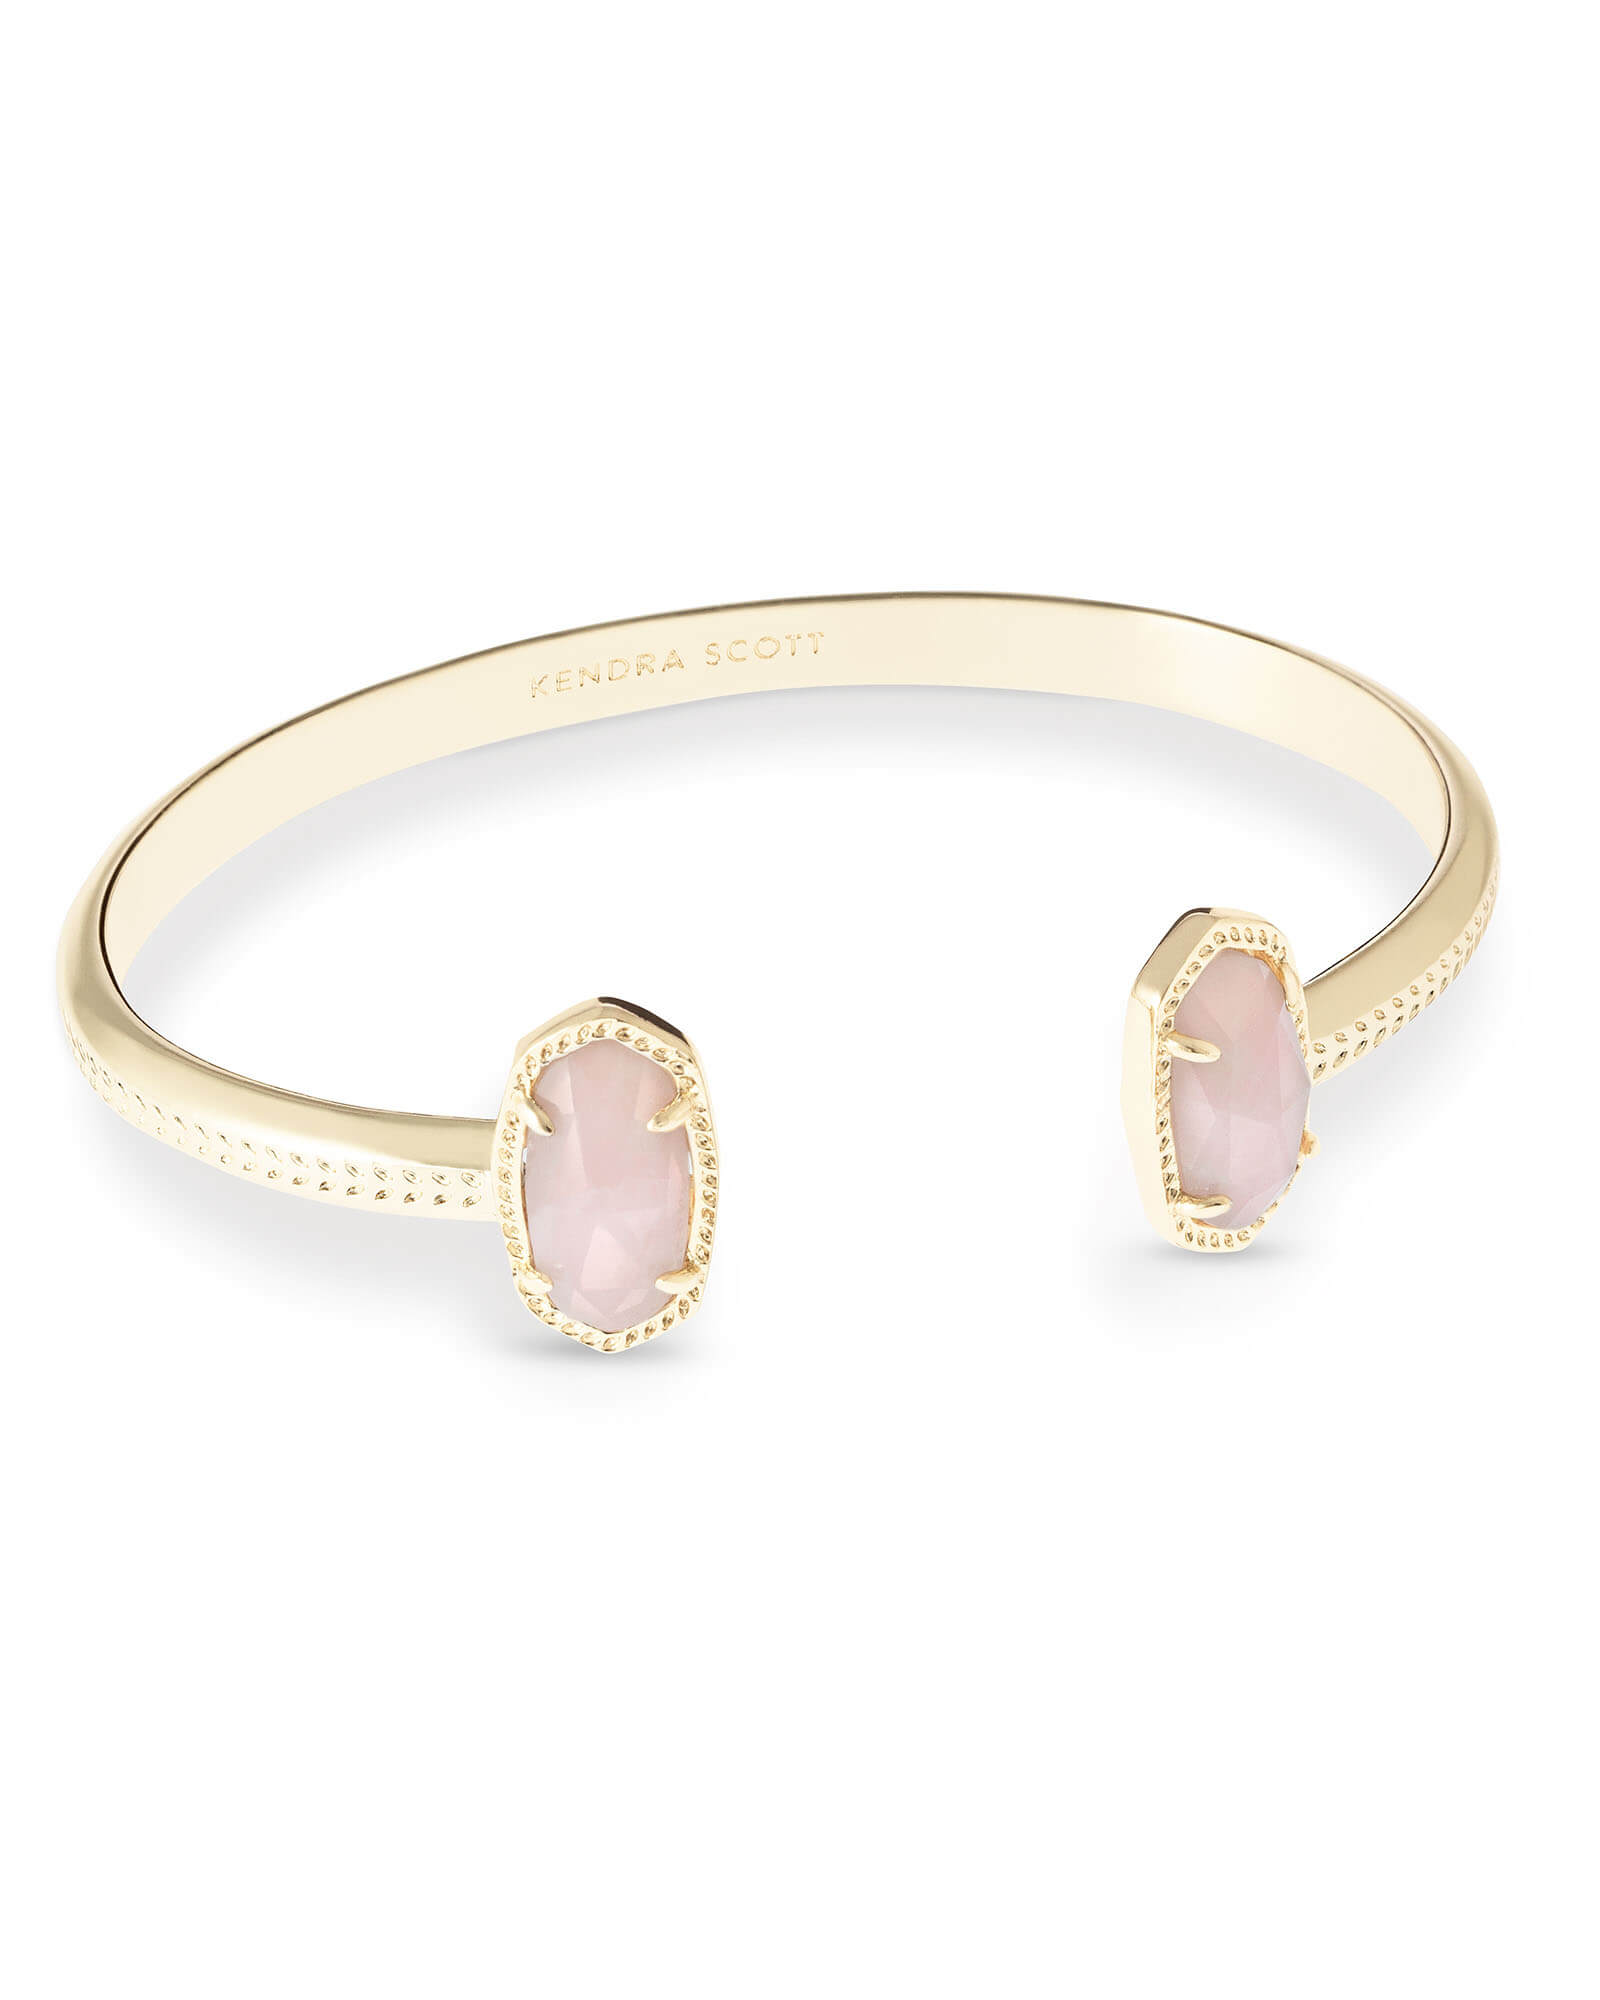 Kendra Scott Grayson Crushed Gemstone Charm Beaded Stretch Bracelet in 14K  Gold Plated | Bloomingdale's